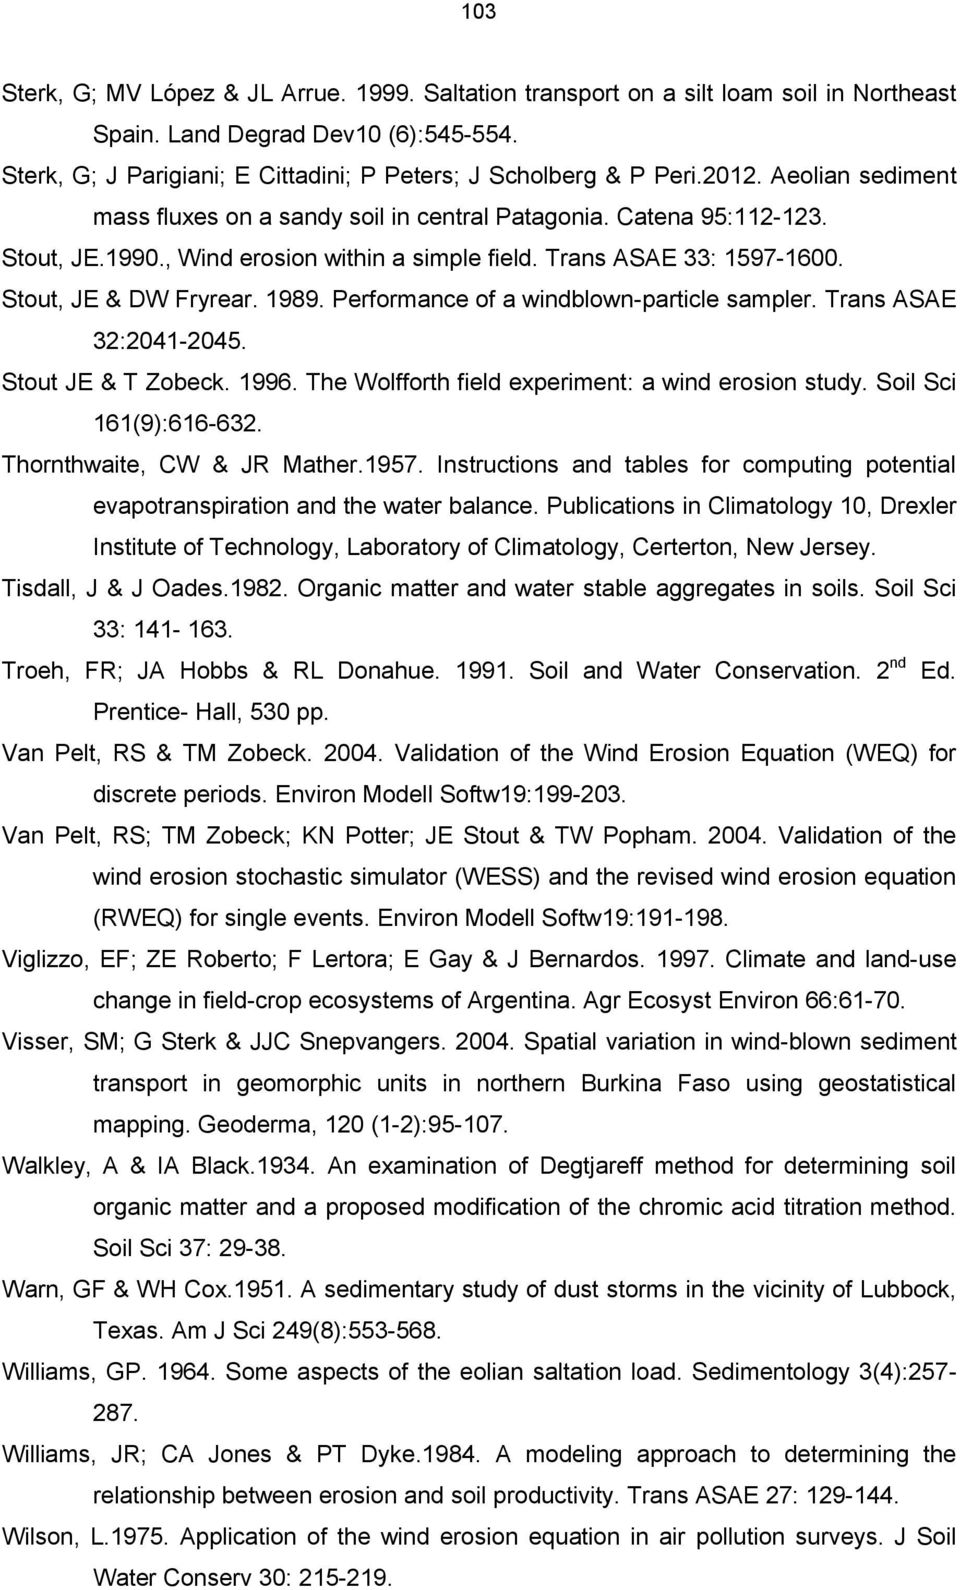 Performance of a windblown-particle sampler. Trans ASAE 32:2041-2045. Stout JE & T Zobeck. 1996. The Wolfforth field experiment: a wind erosion study. Soil Sci 161(9):616-632.